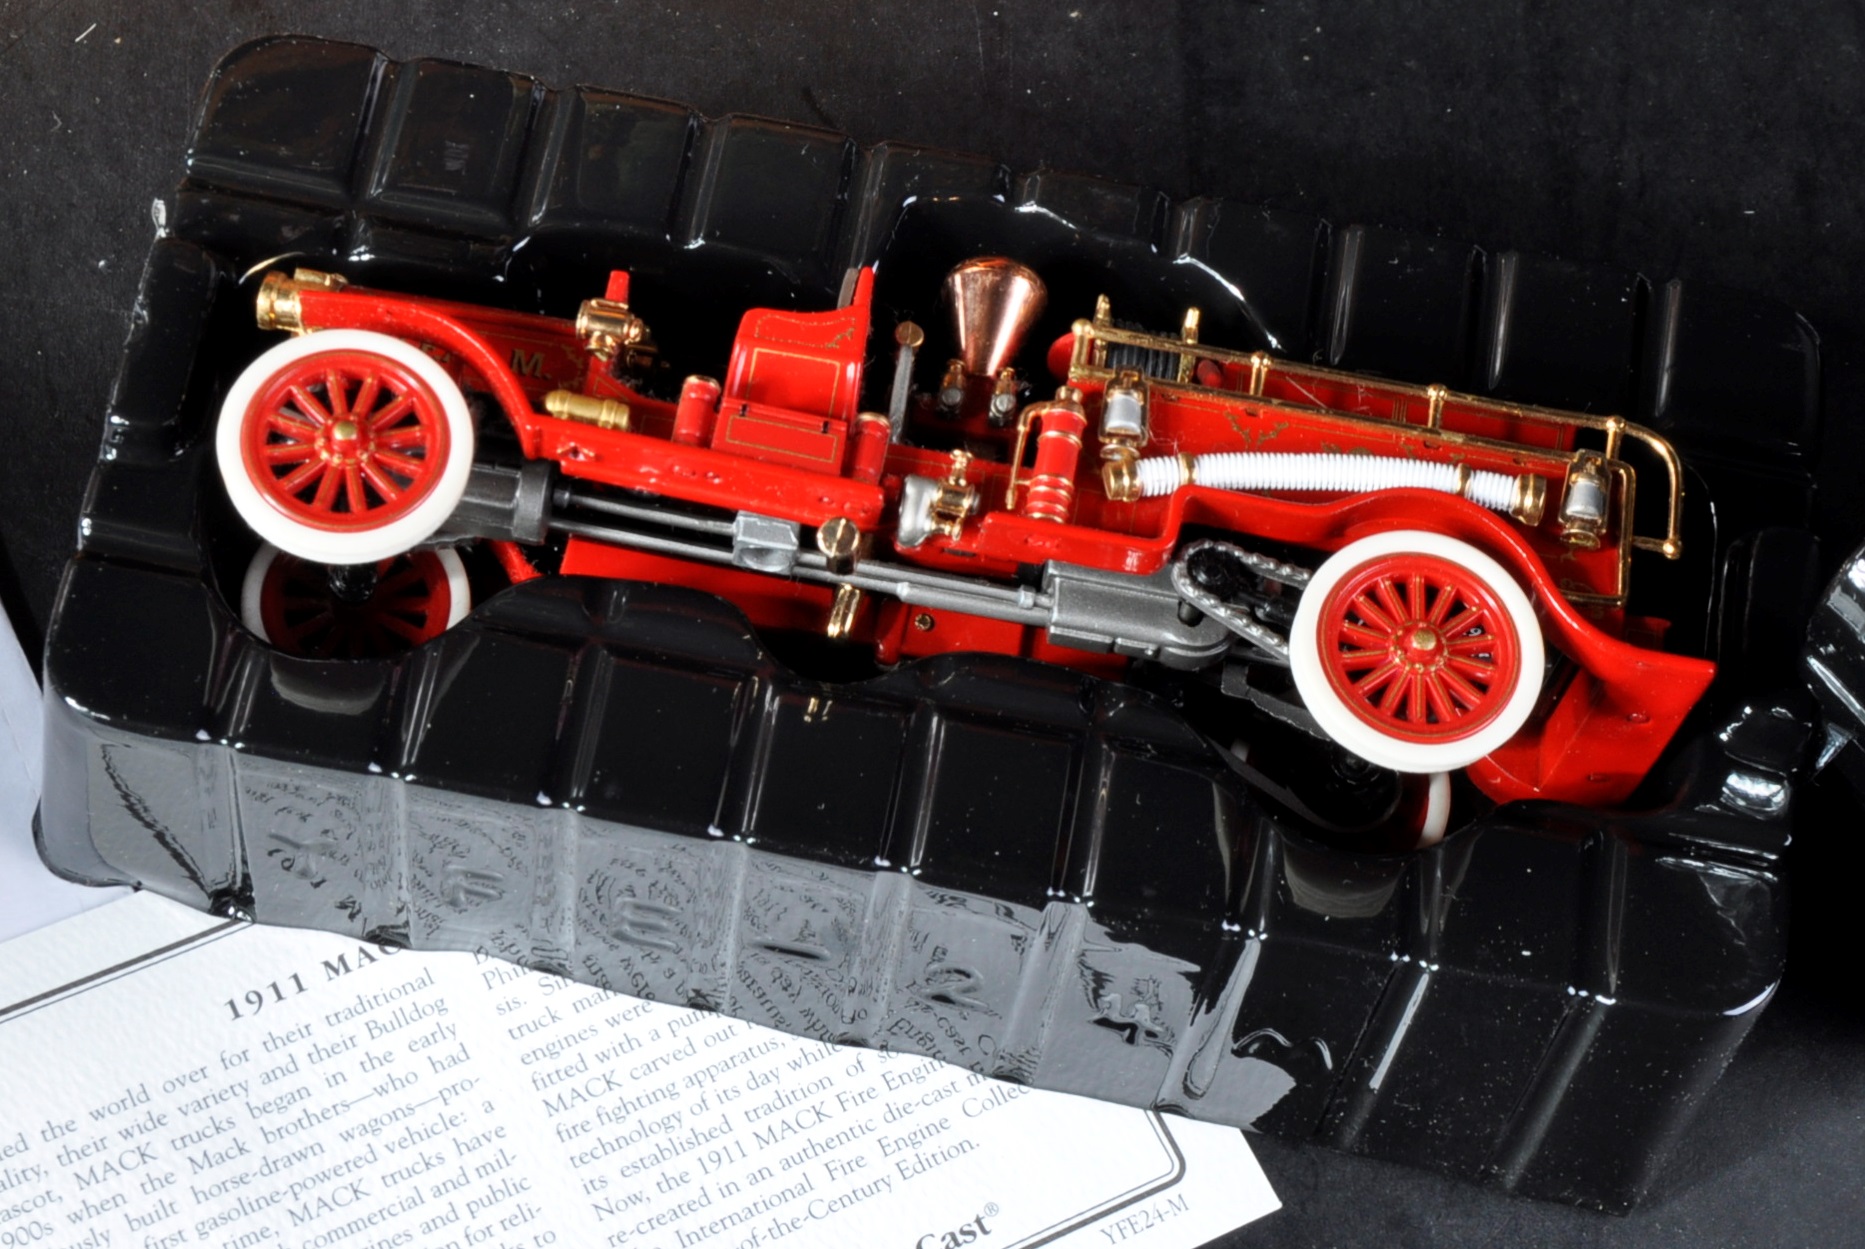 COLLECTION OF X8 MATCHBOX FIRE ENGINE DIECAST MODELS - Image 4 of 5